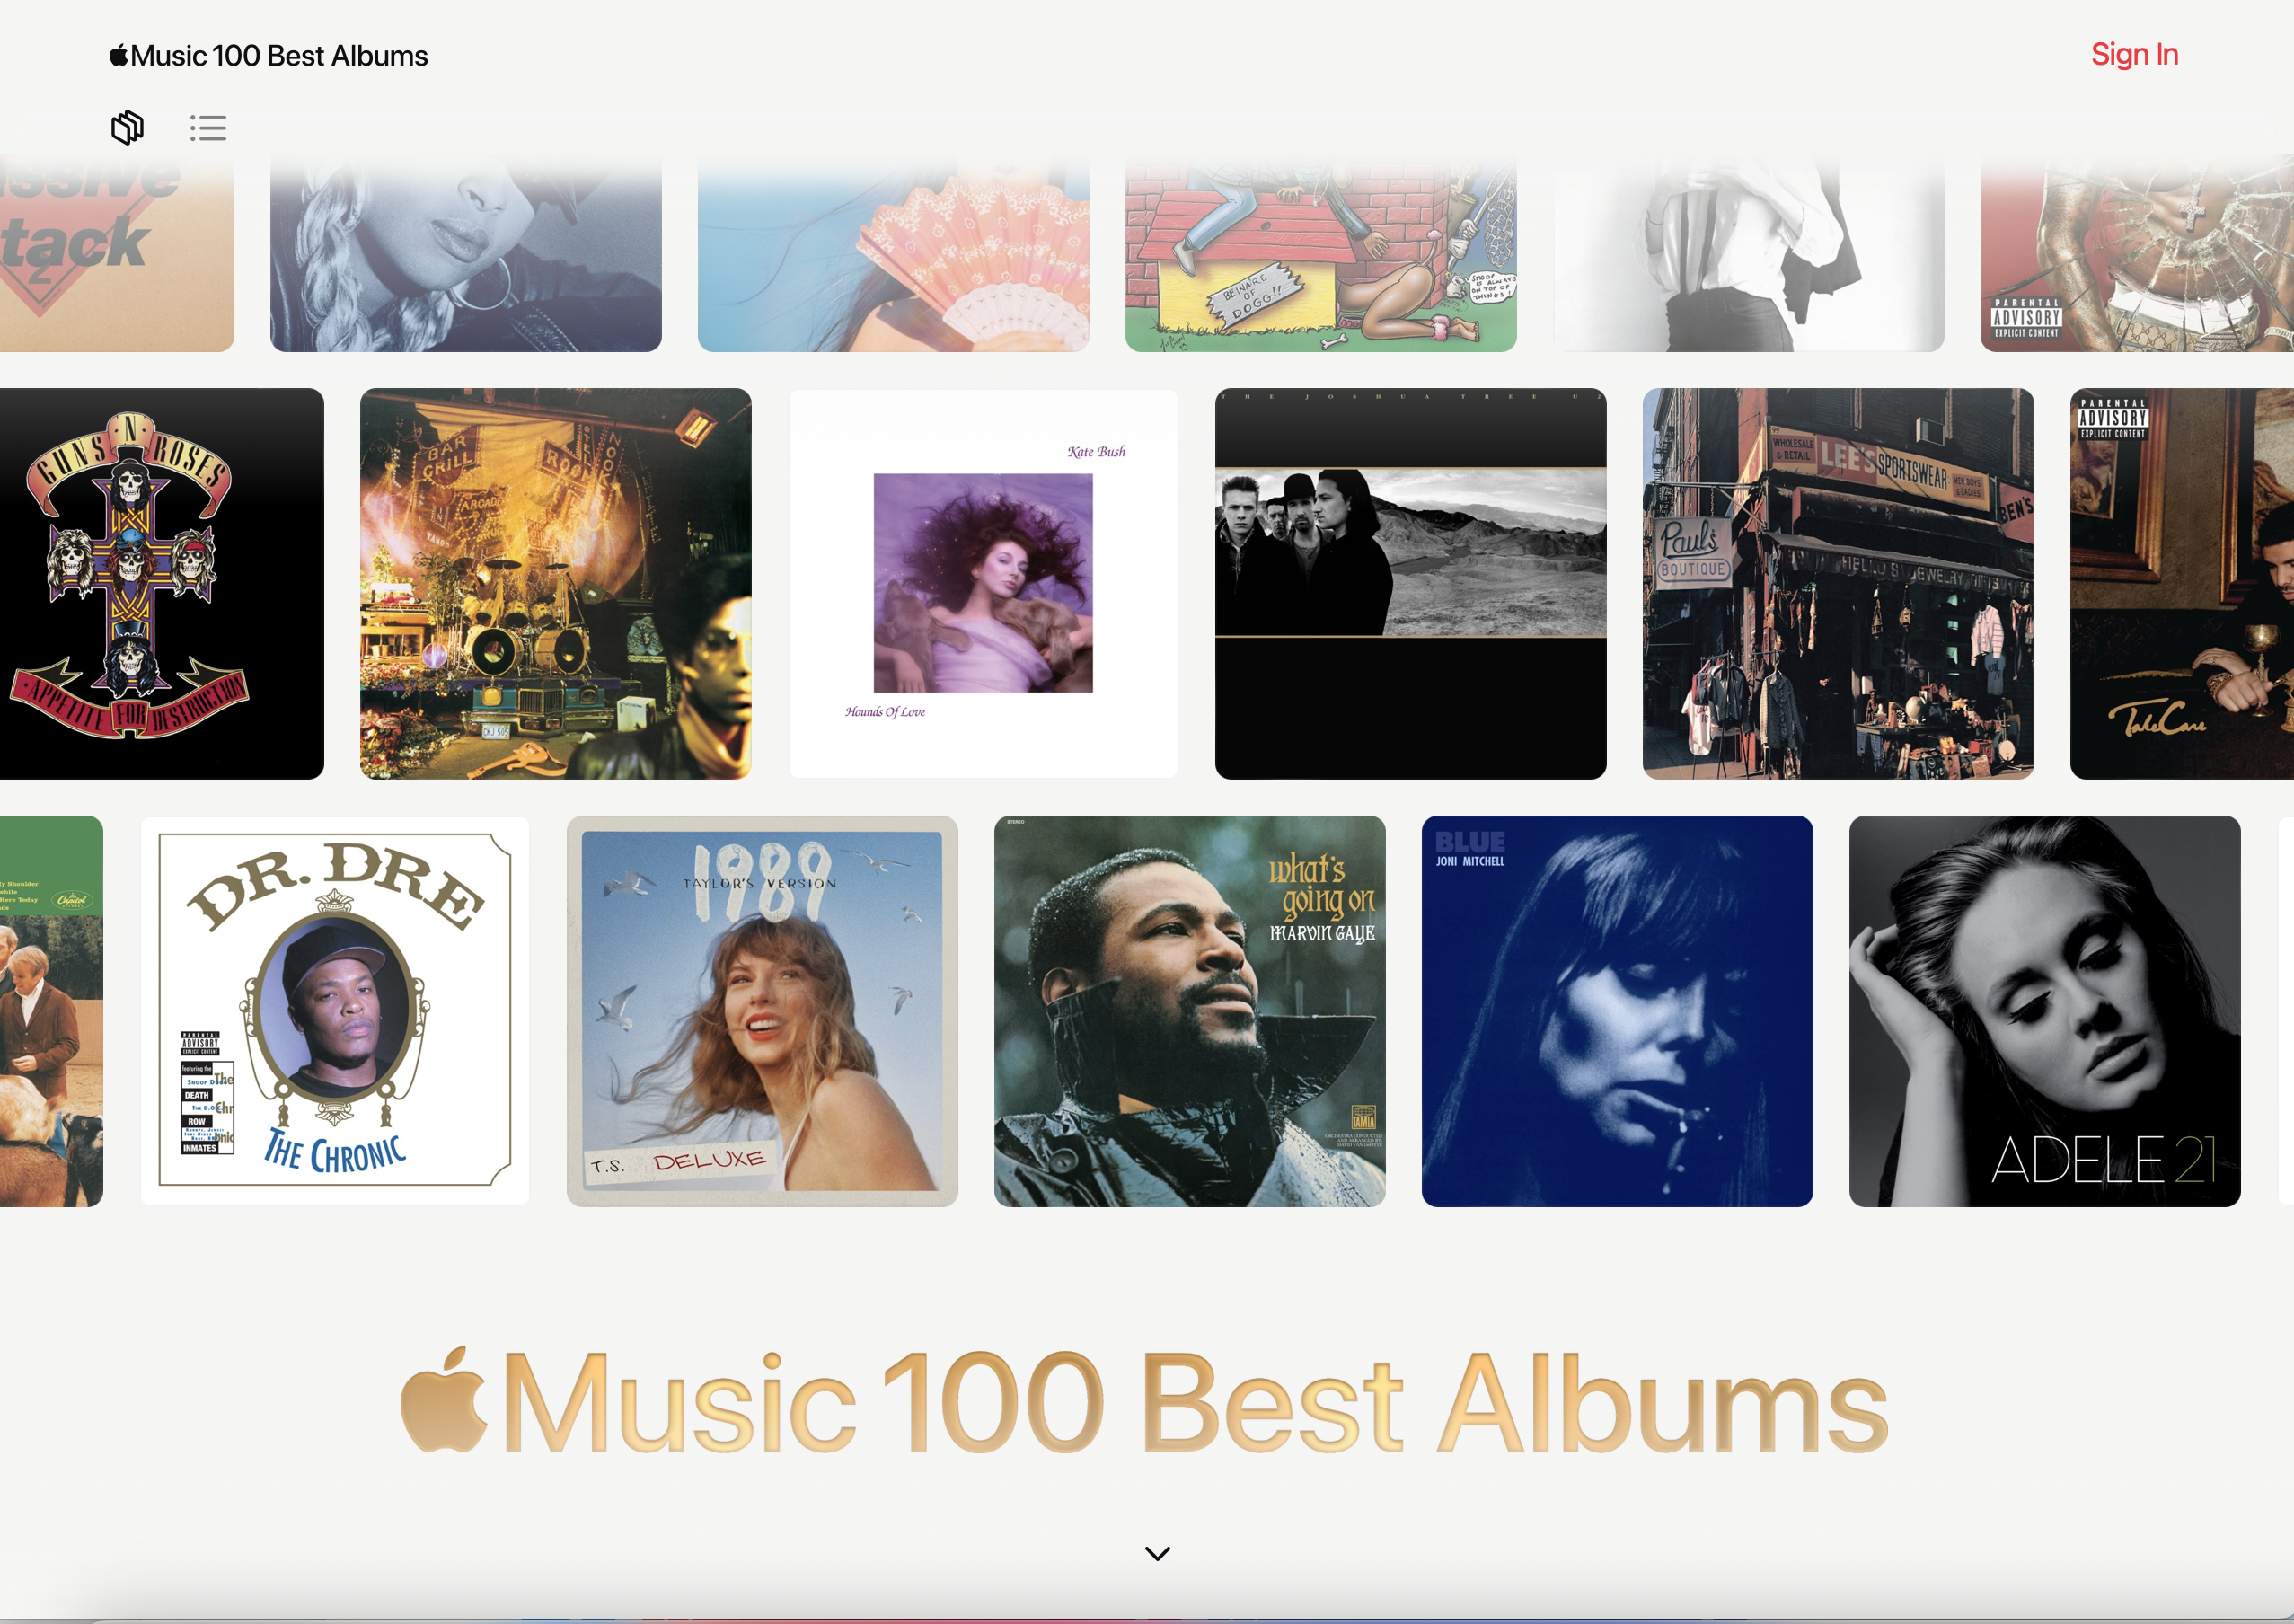 Yes, Apple’s 100 Best Albums List Is Ridiculous and Exists Almost Expressly to Make You Mad